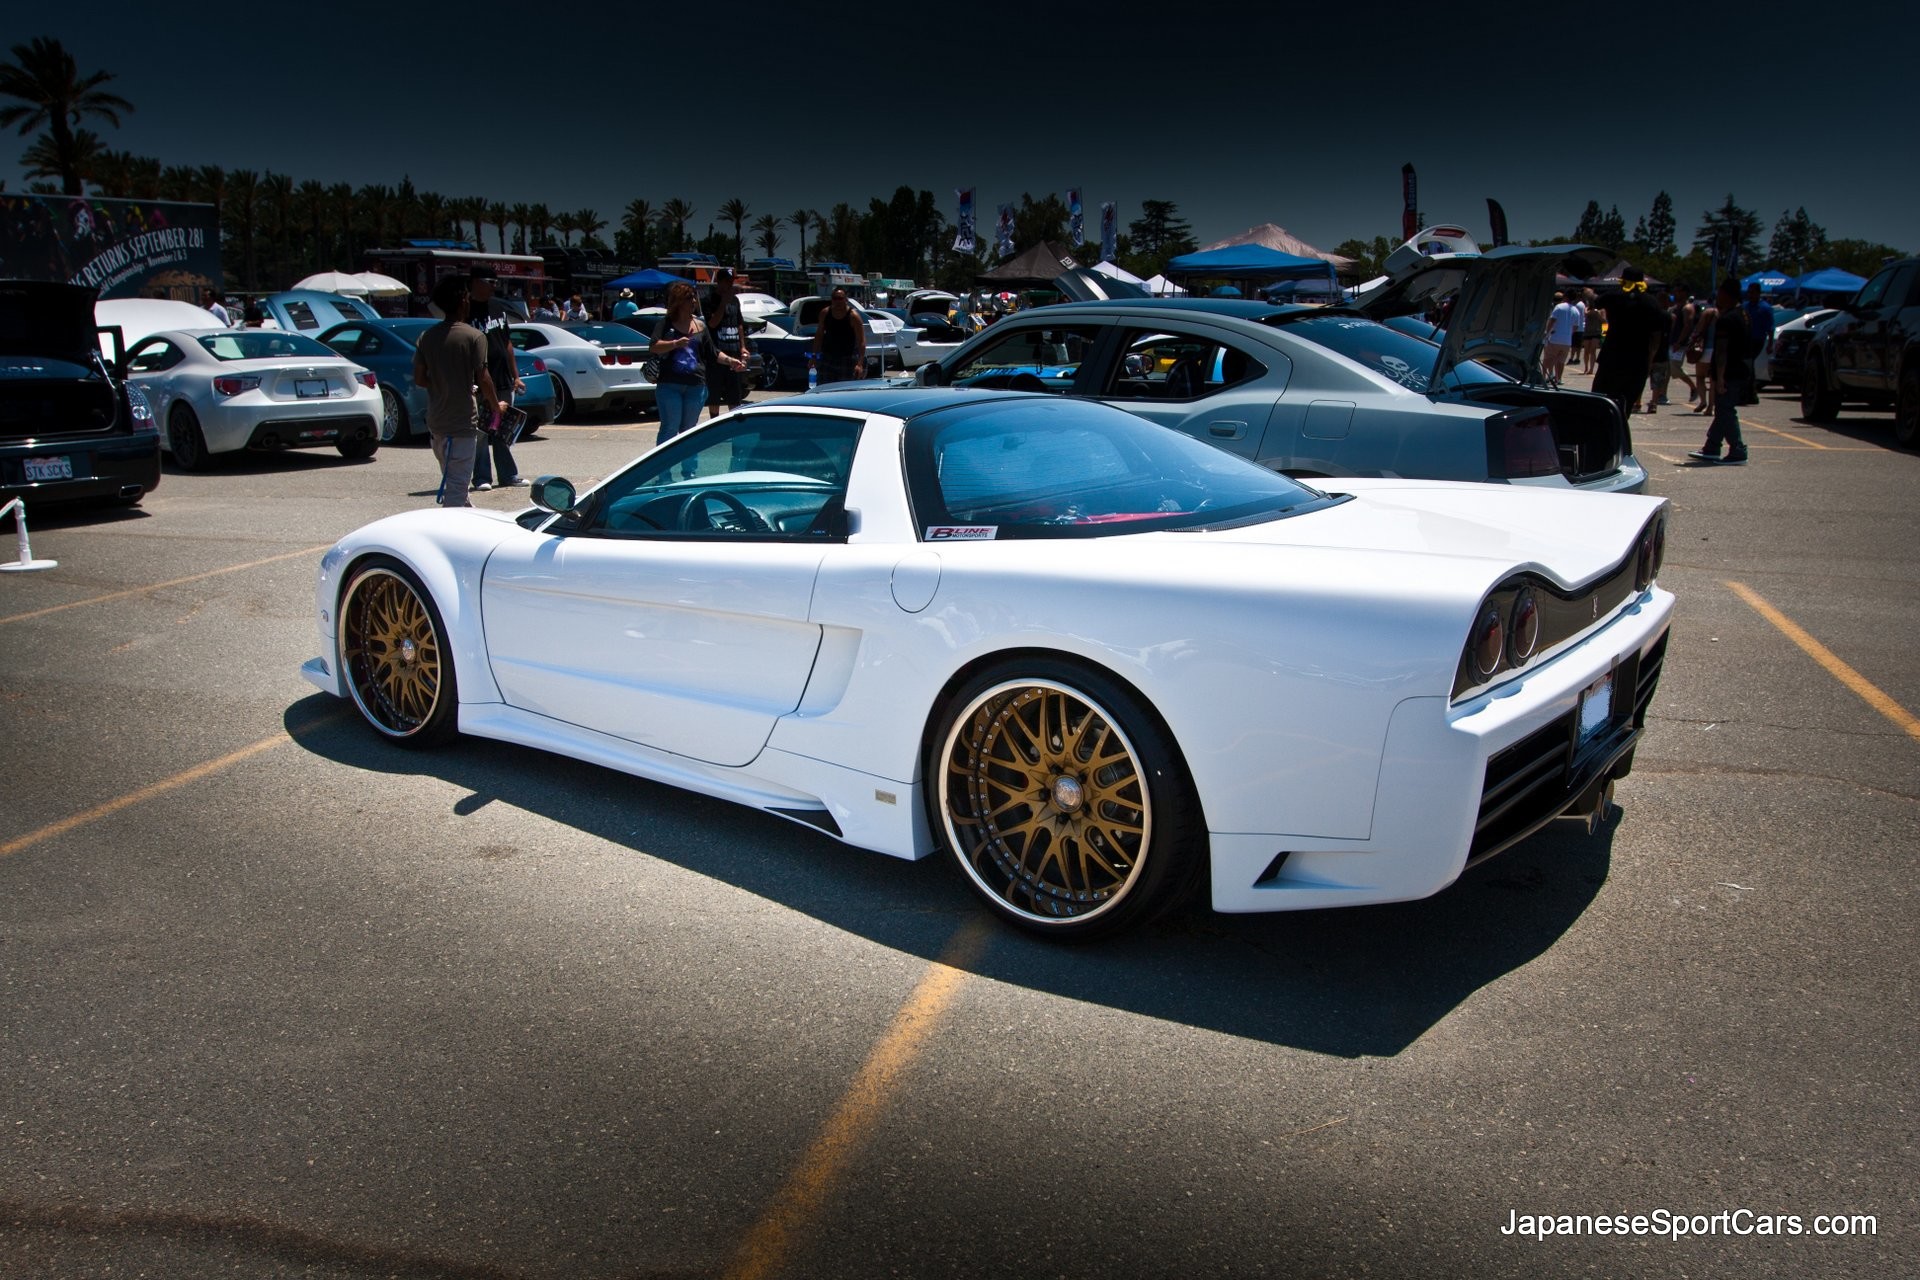 1920x1280 1991 Acura NSX with Veilside Fortune NSX Body Kit - Picture Number: 585661